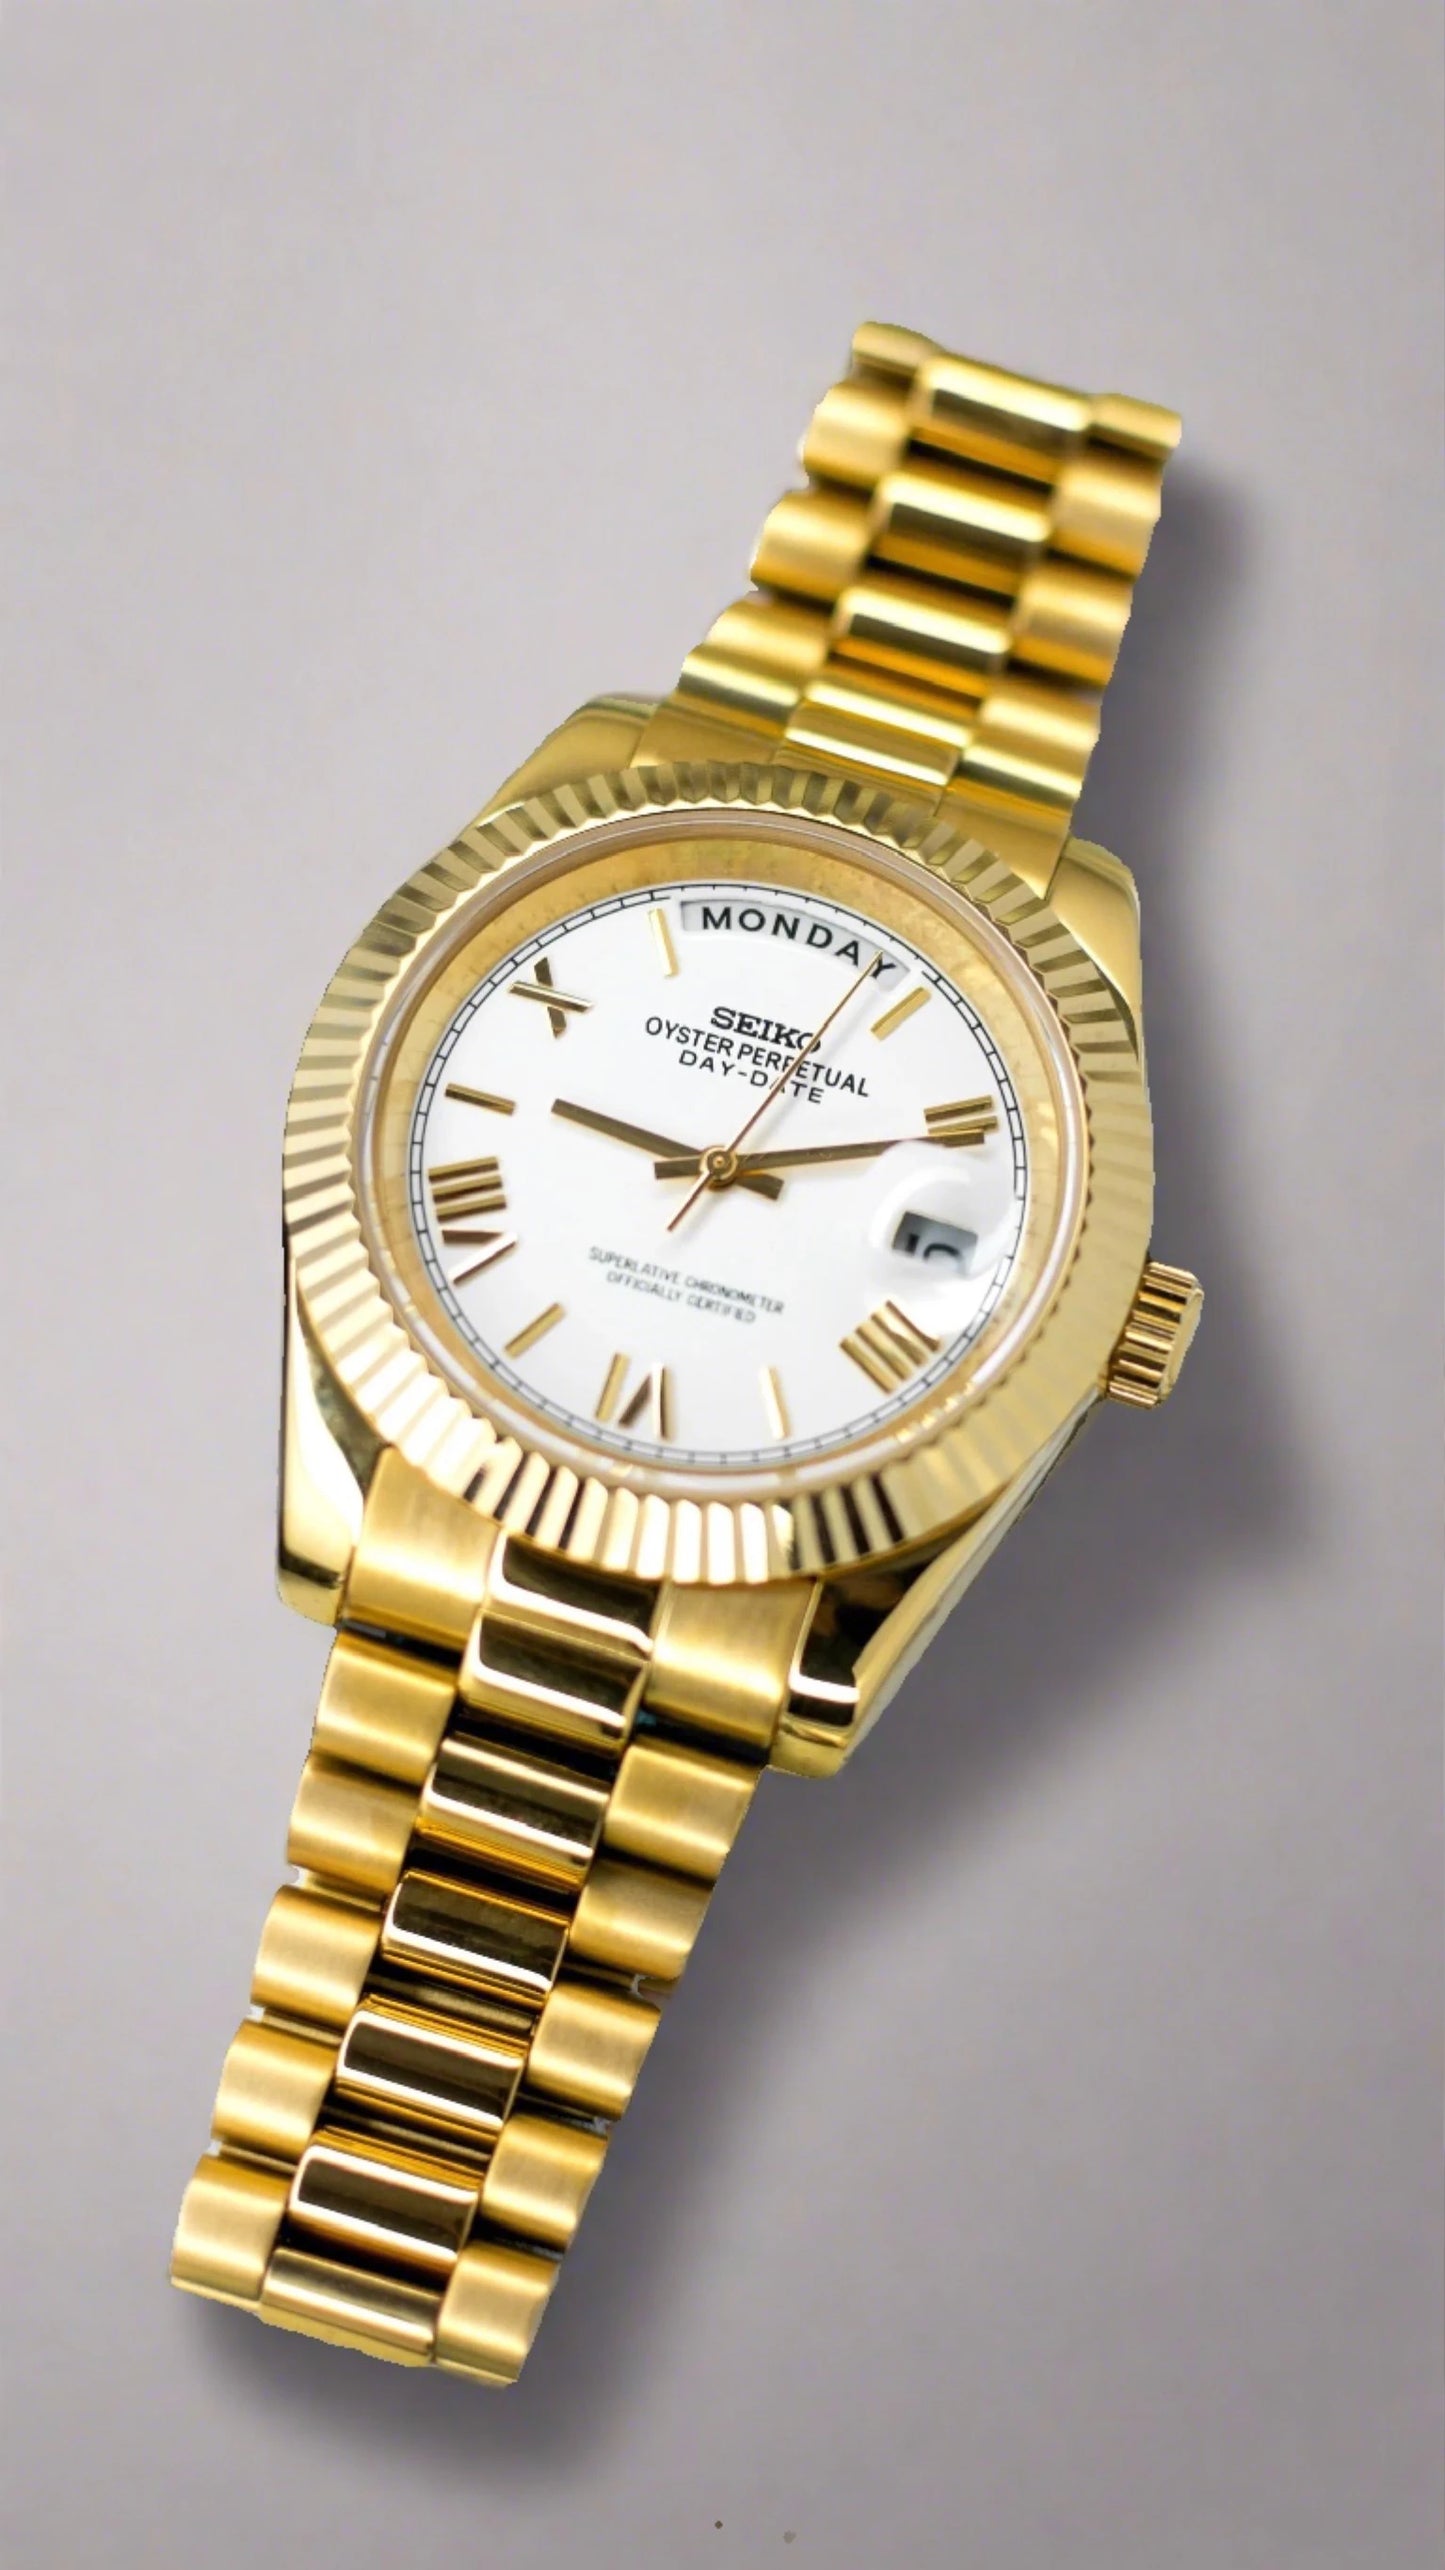 Seiko Mod white dial Gold Day date automatic watch